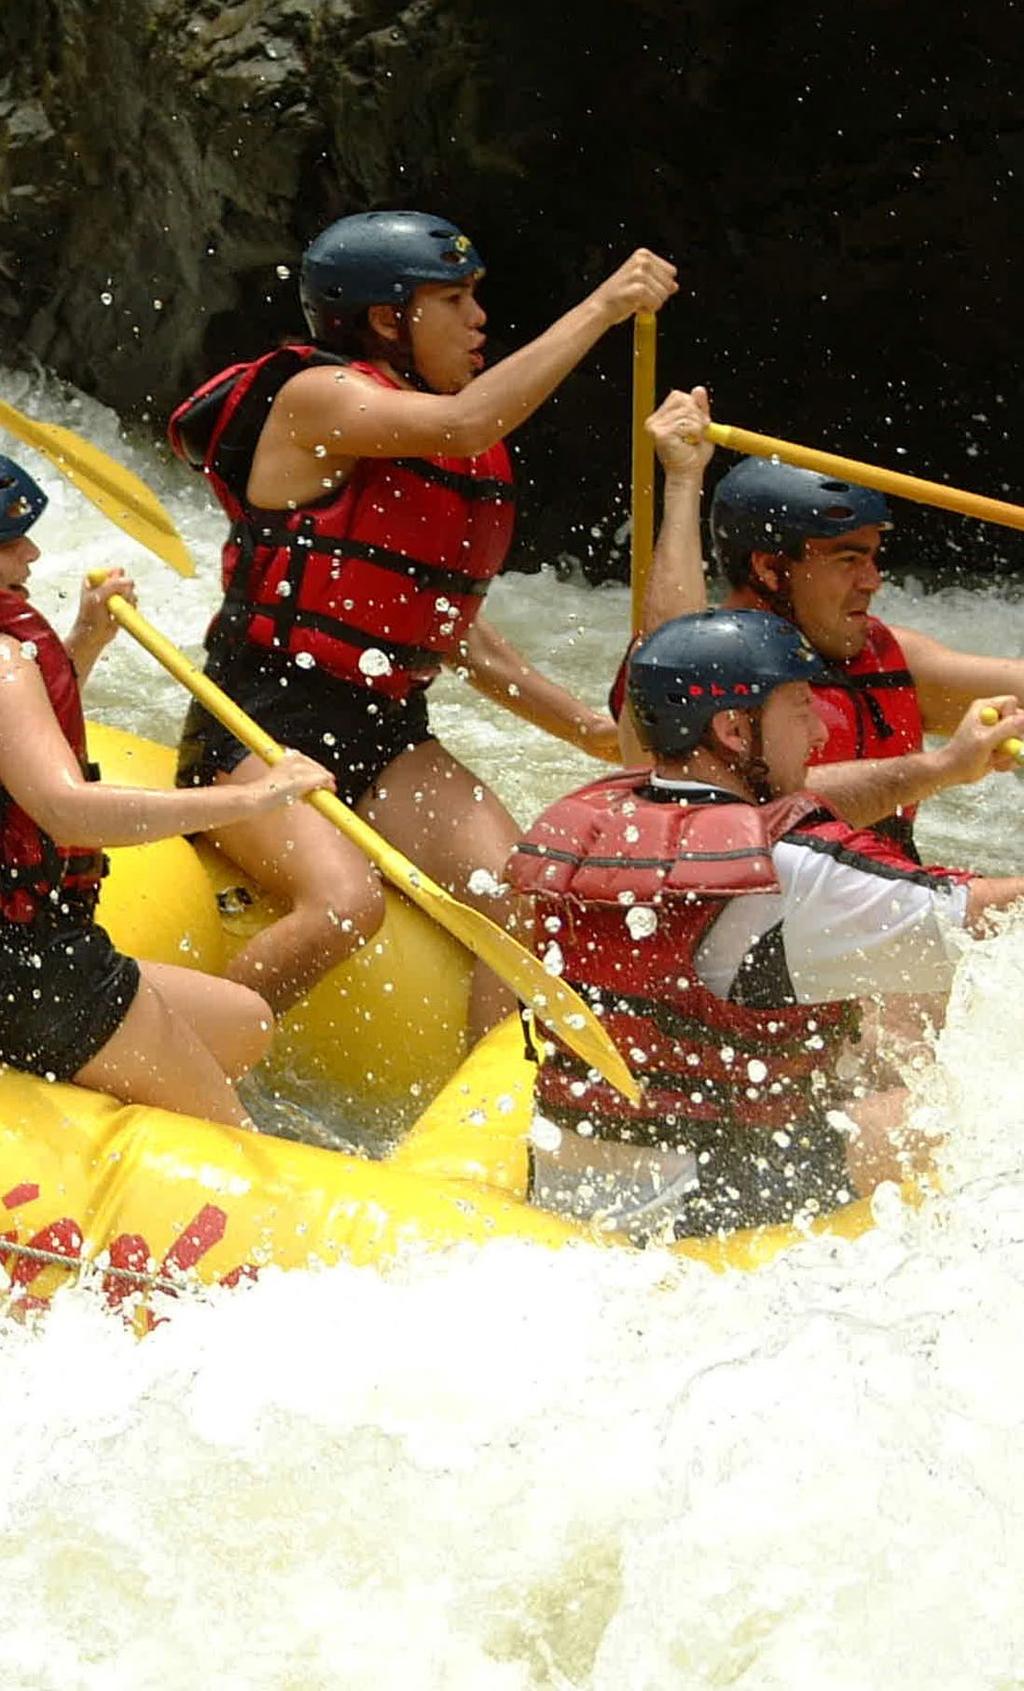 The challenge is to enjoy rafting the wild Class III and IV rapids of the Pacuare, a river that ranks among the top ones in the world.